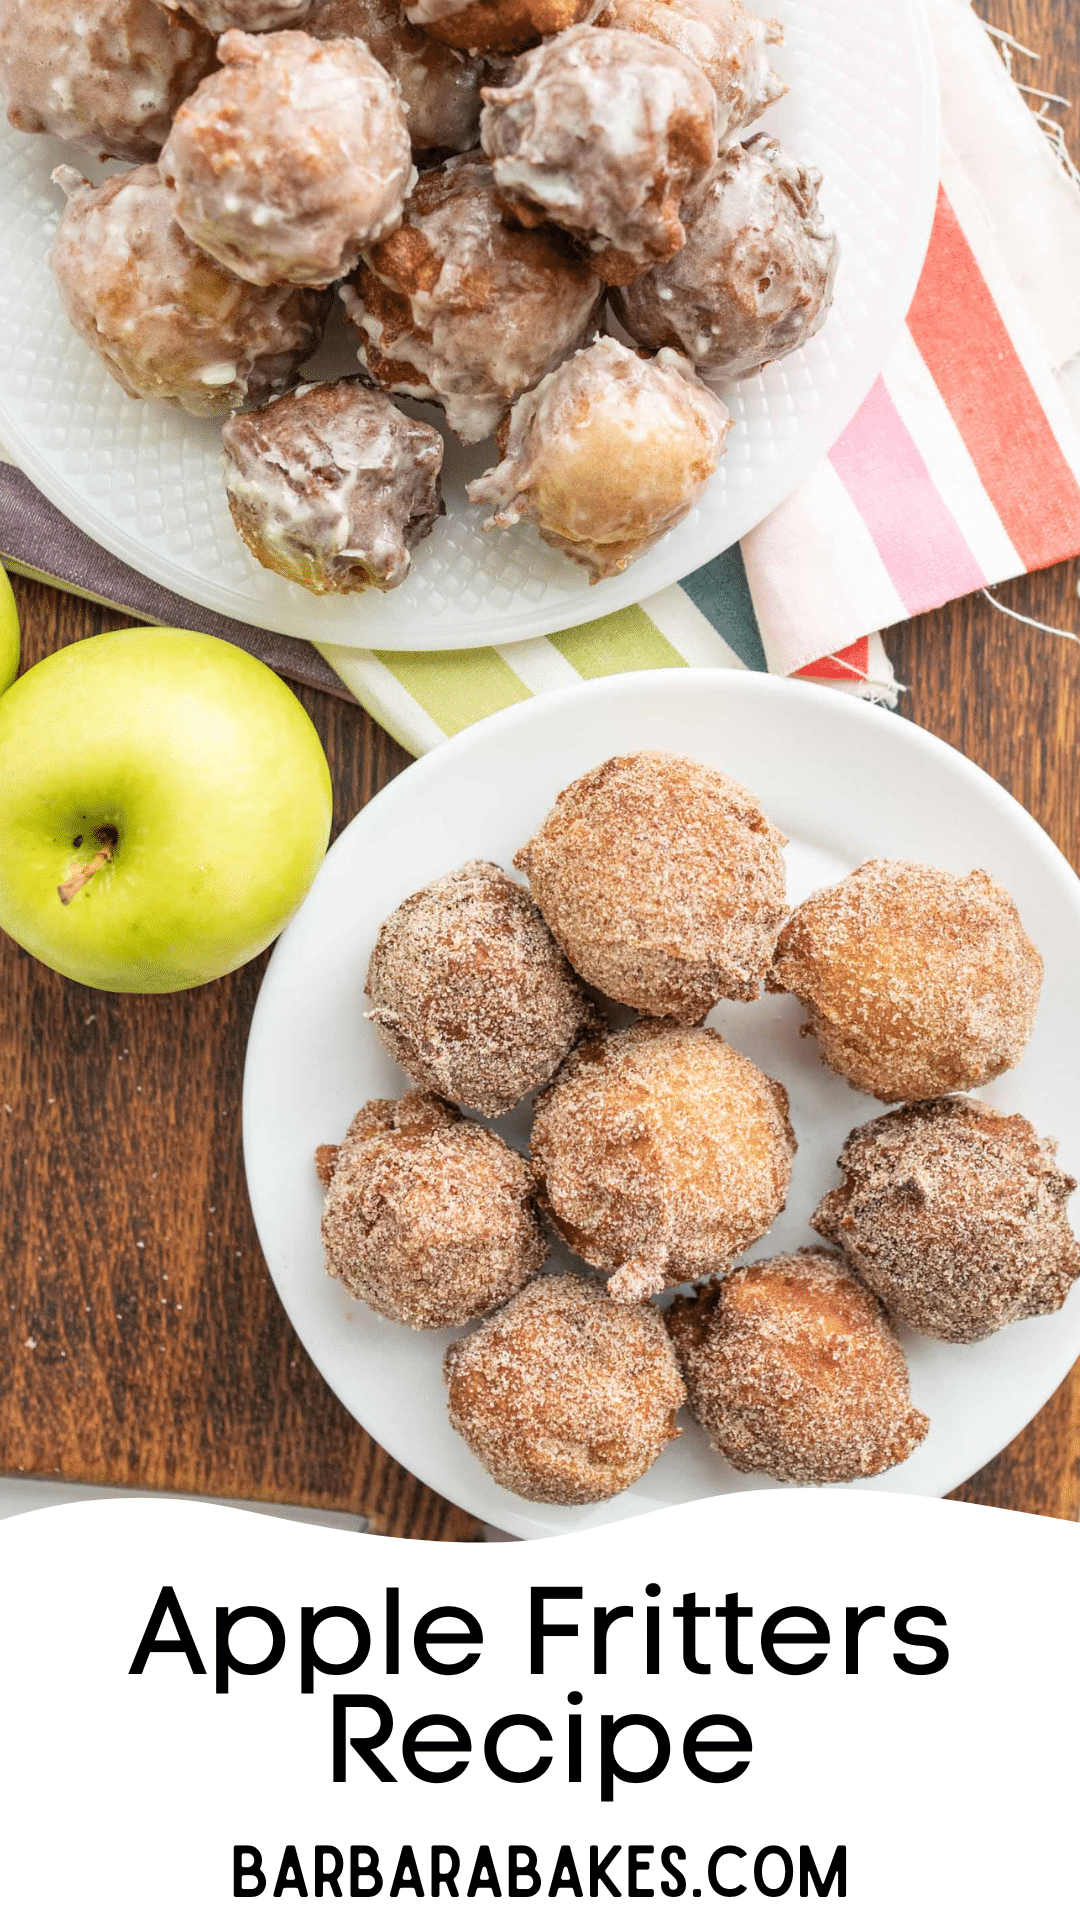 Apple fritters are created with a no-yeast homemade batter and fresh apples, fried to golden perfection and glazed simply. via @barbarabakes